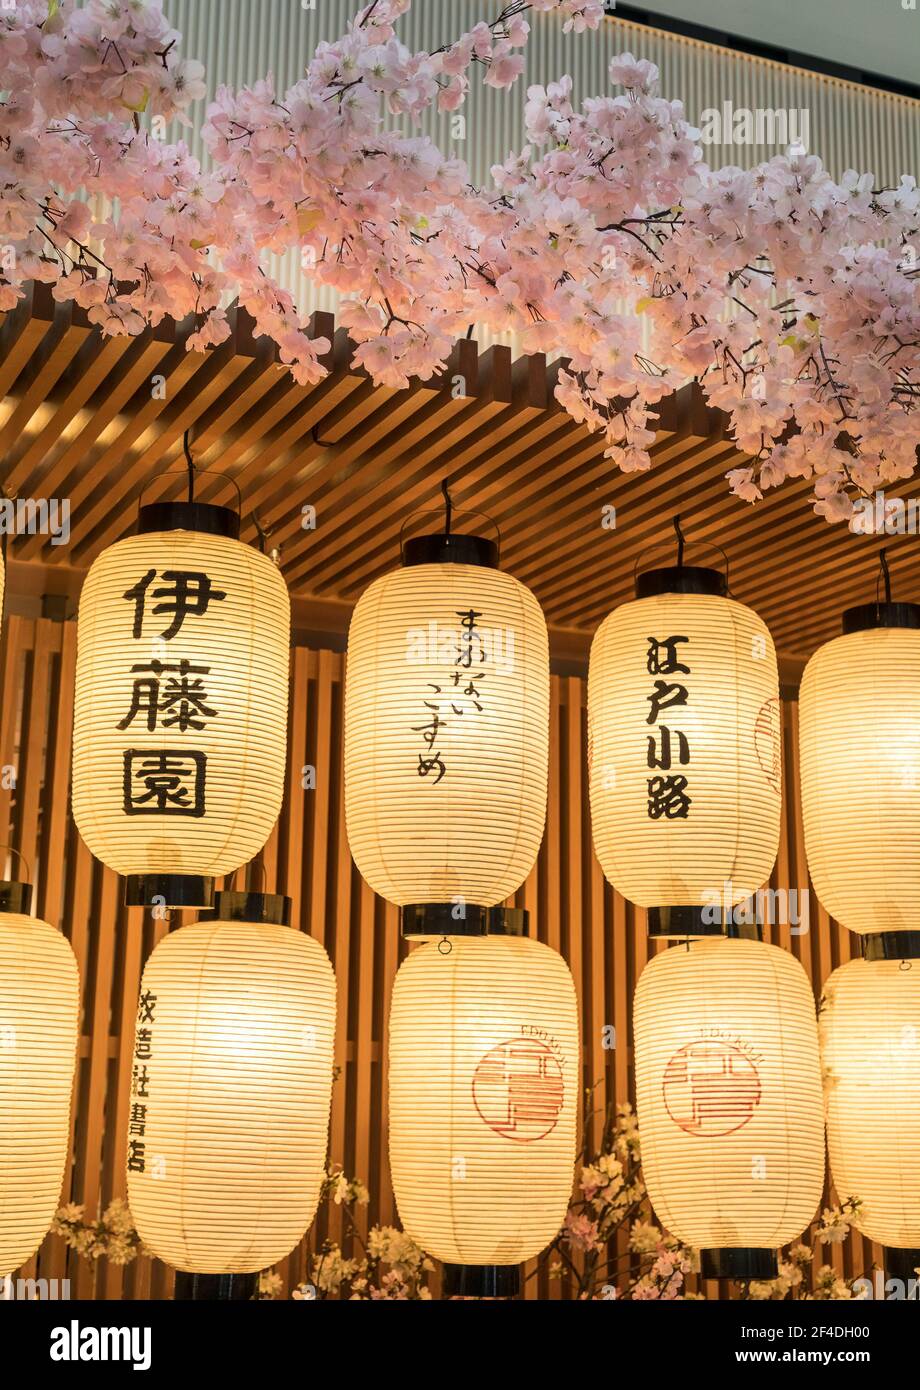 Lanterns and artificial cherry blossom outside a shop in the recreated old town part of the airport, Tokyo, Japan Stock Photo